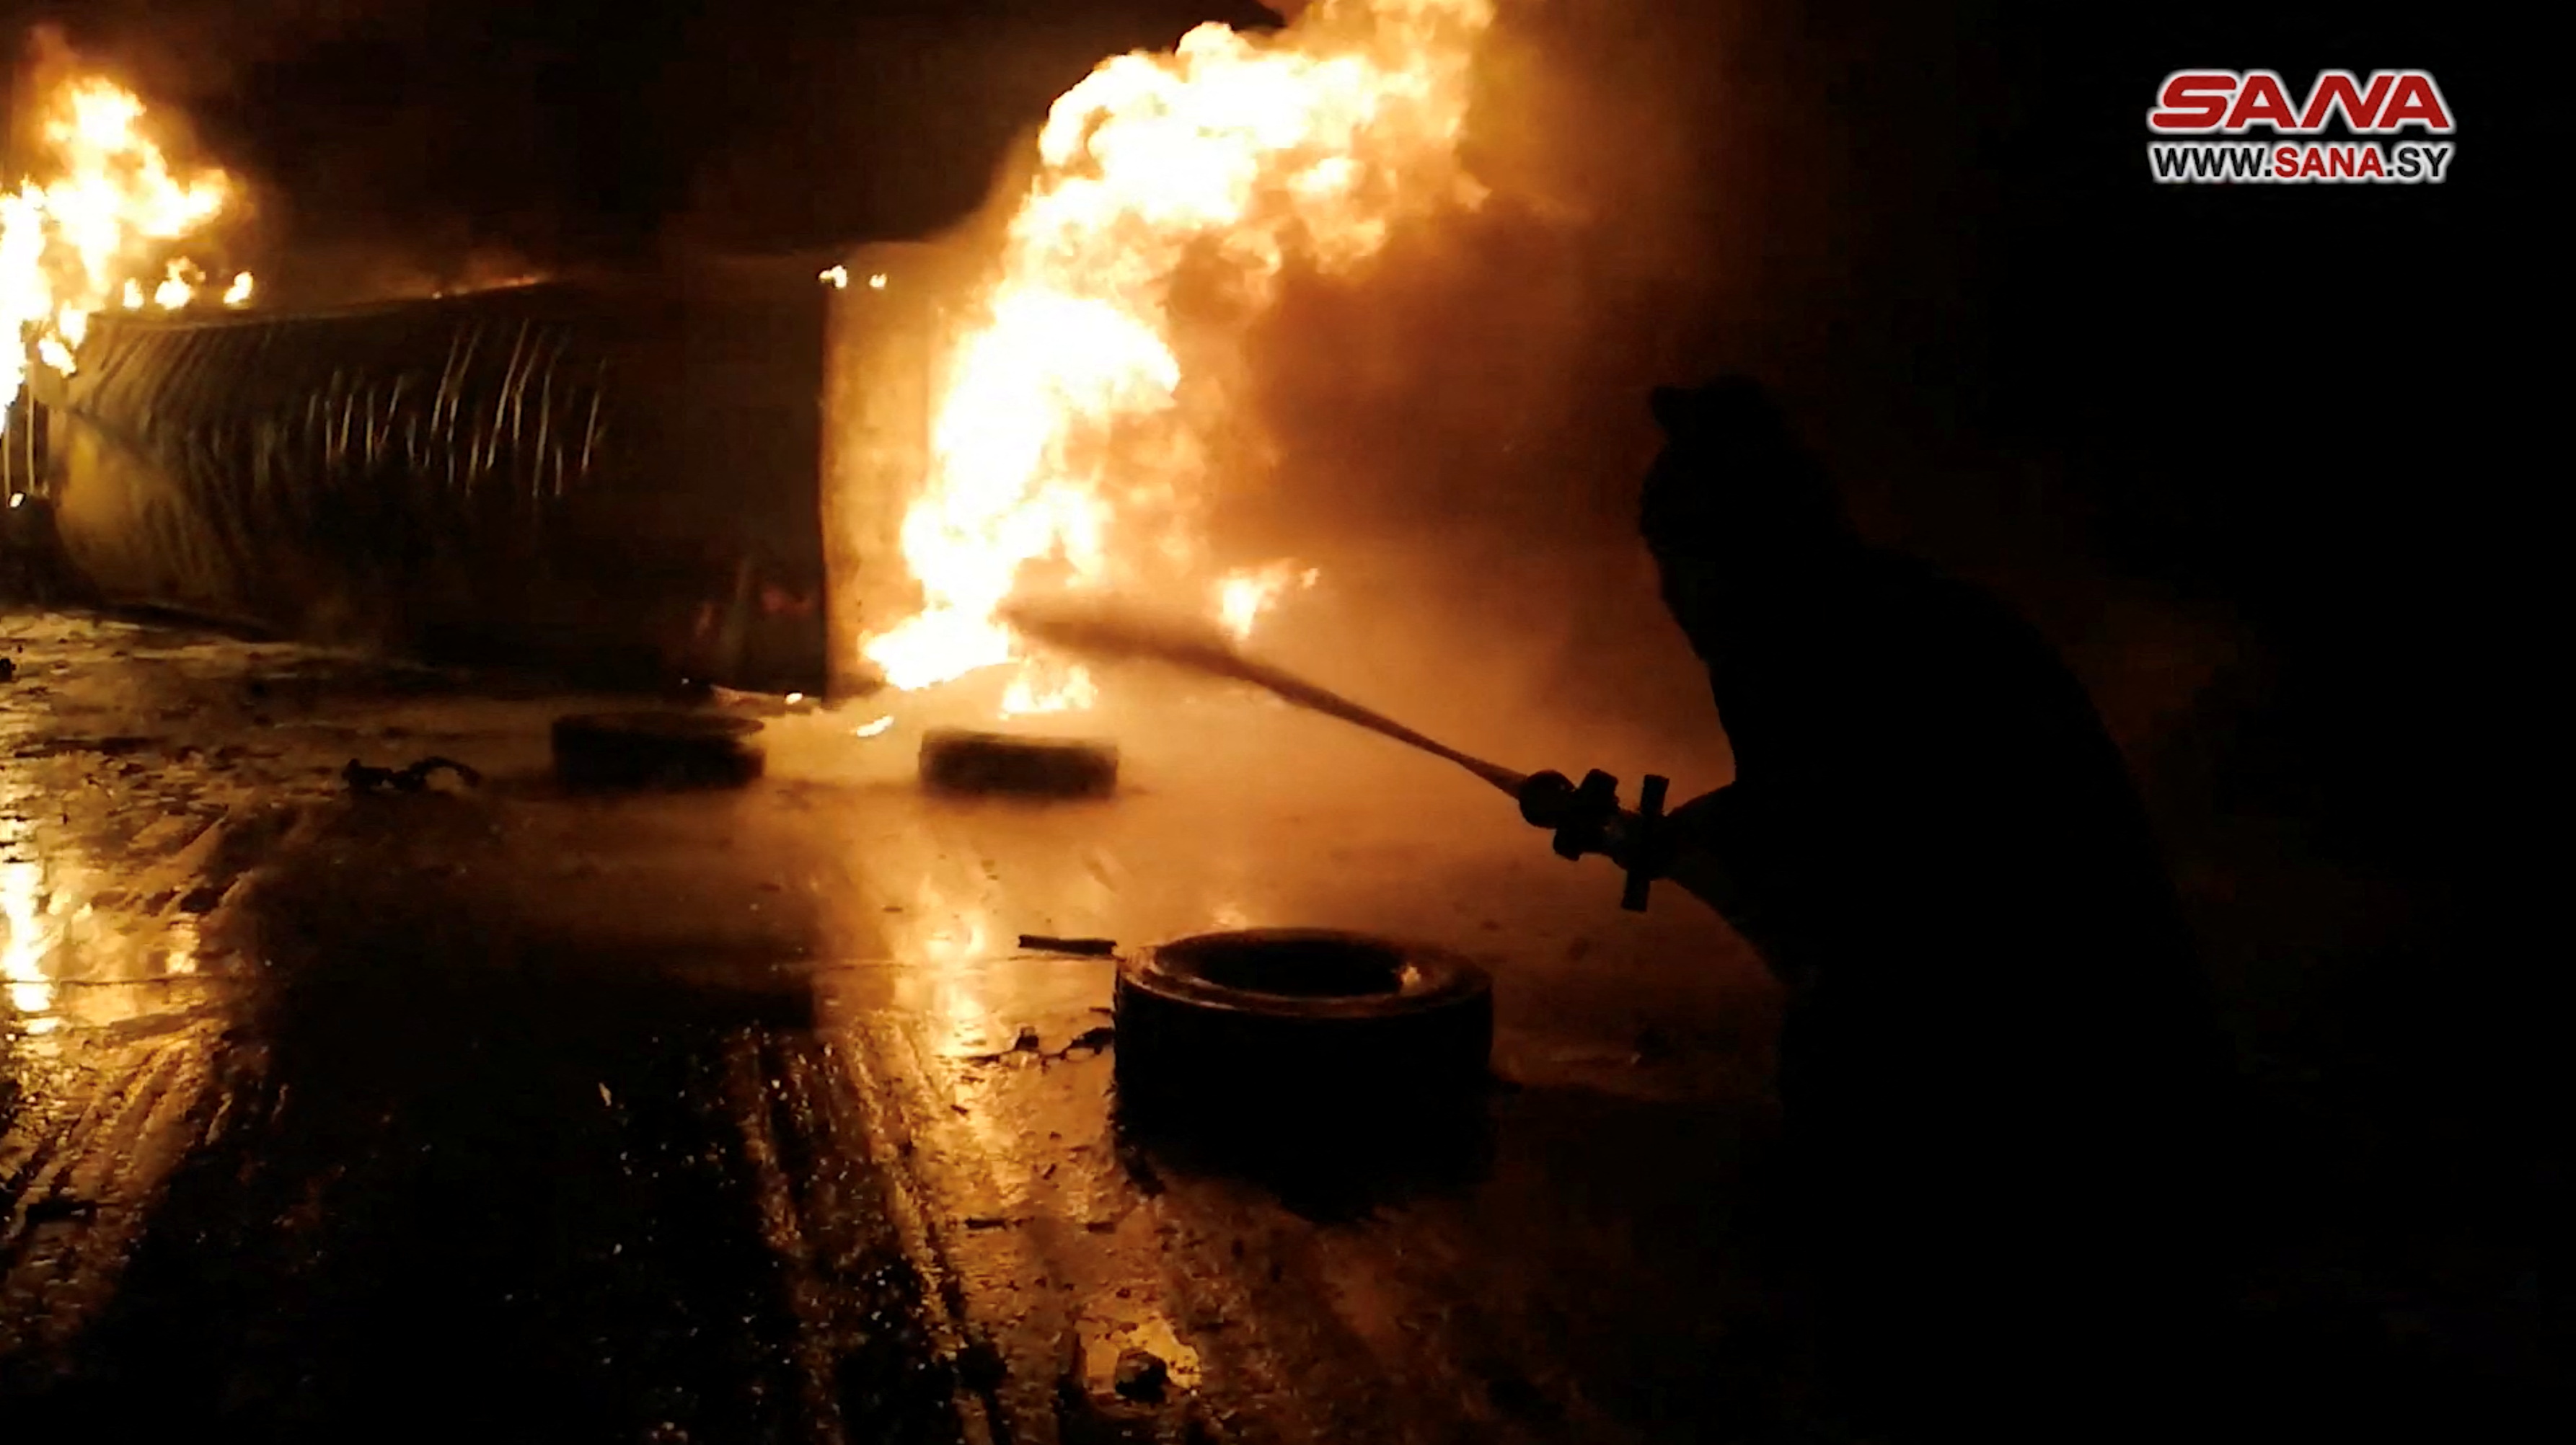 A still image from a video footage shows a firefighter dousing flames at the Syrian port of Latakia